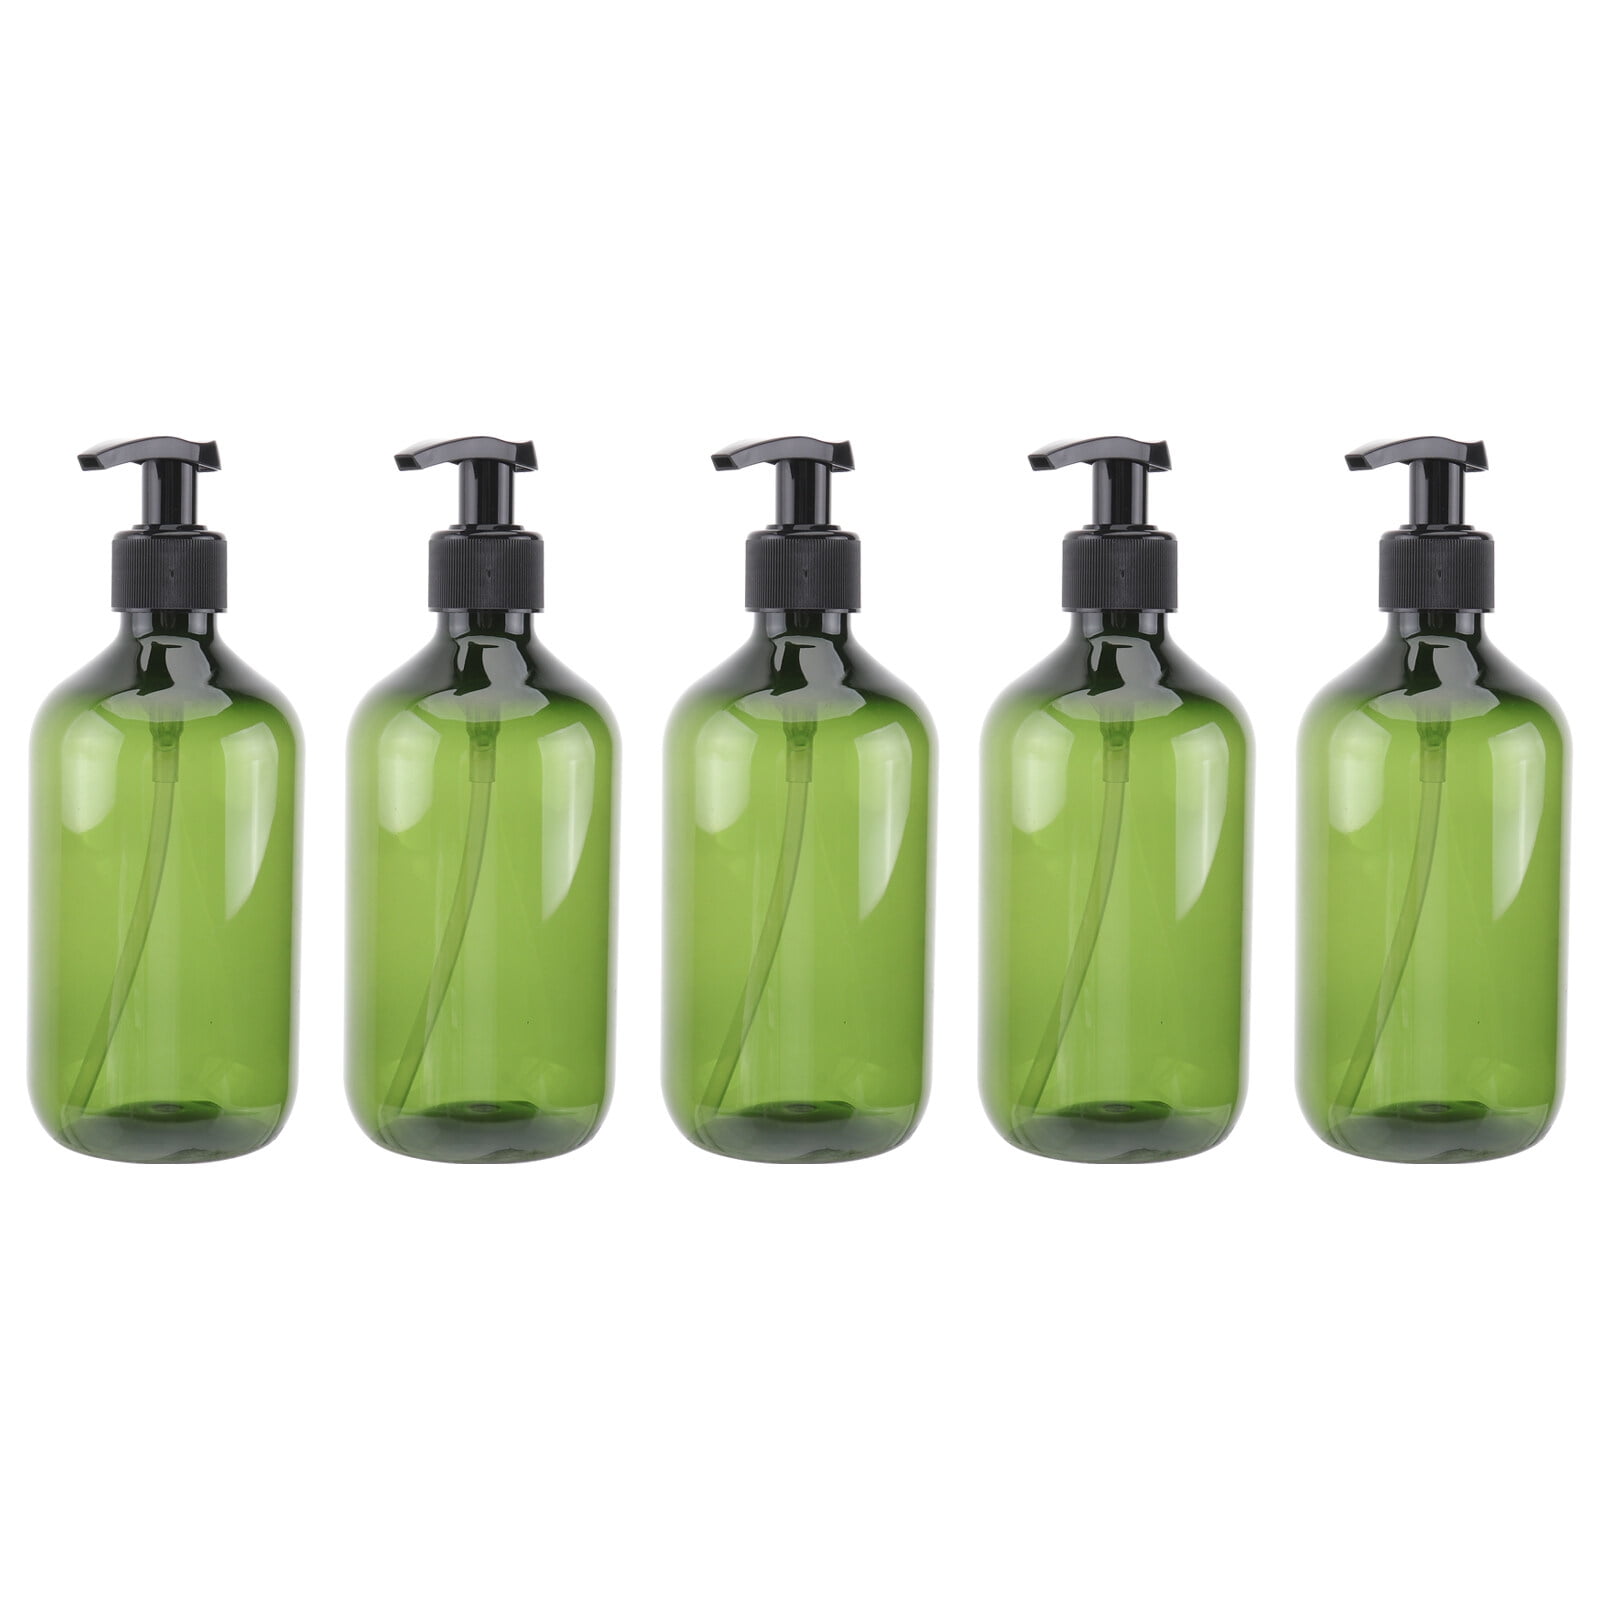 Mels Candles & More Green Liquid Candle Dye - 1 Ounce Glass Dropper Bottle